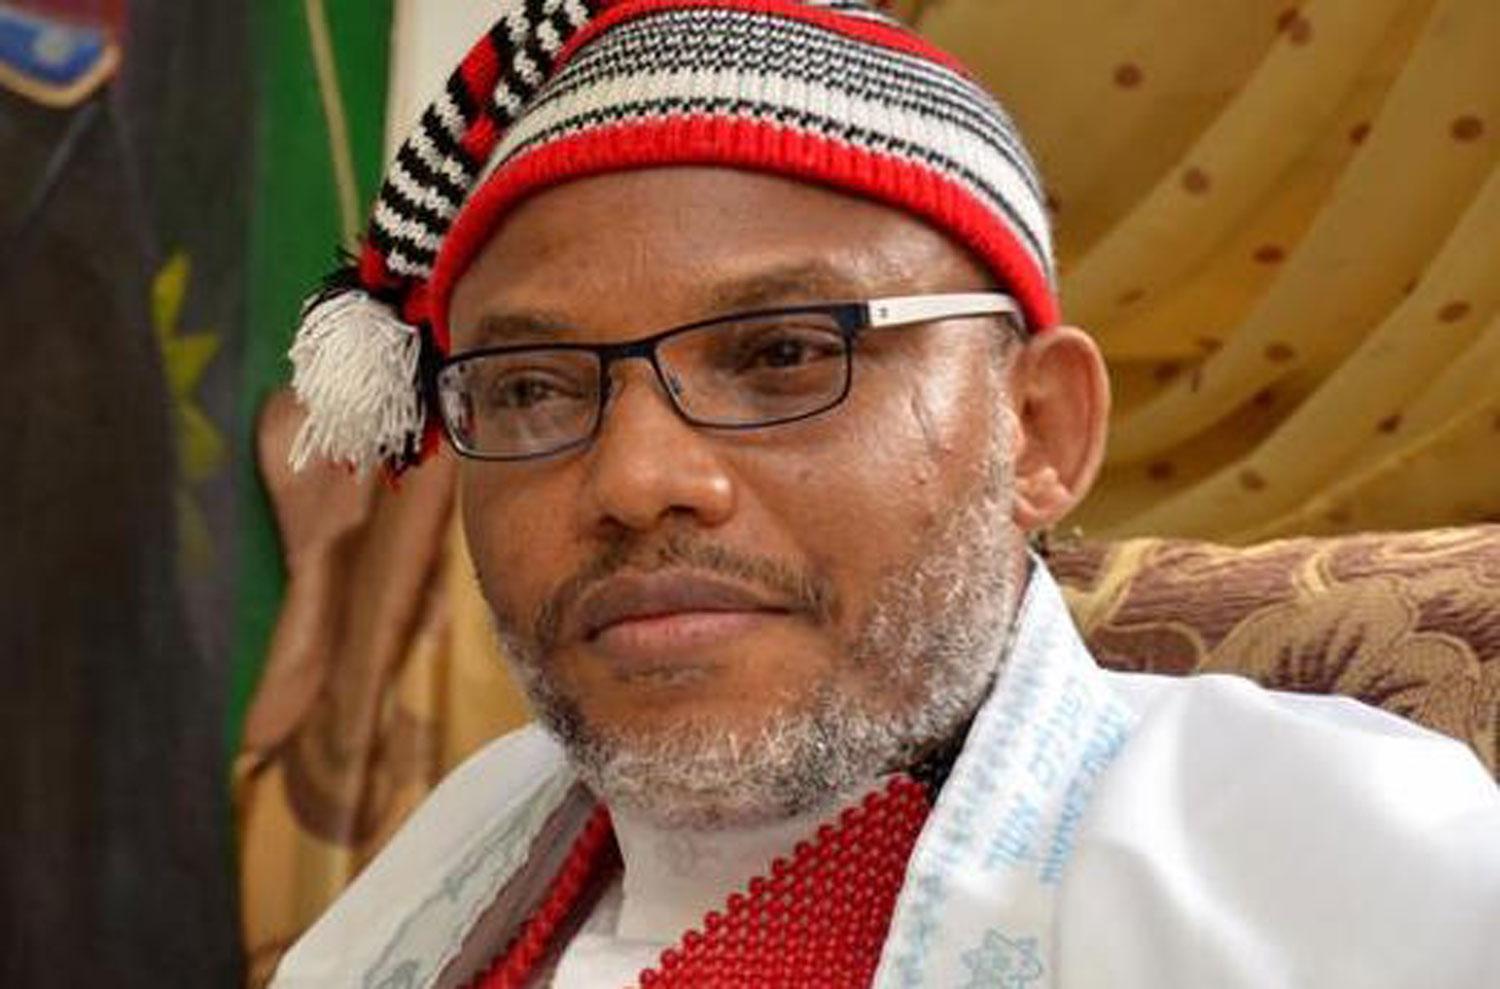 Nnamdi Kanu: Forum lauds Igbo leaders’ appeal to Buhari for political solution